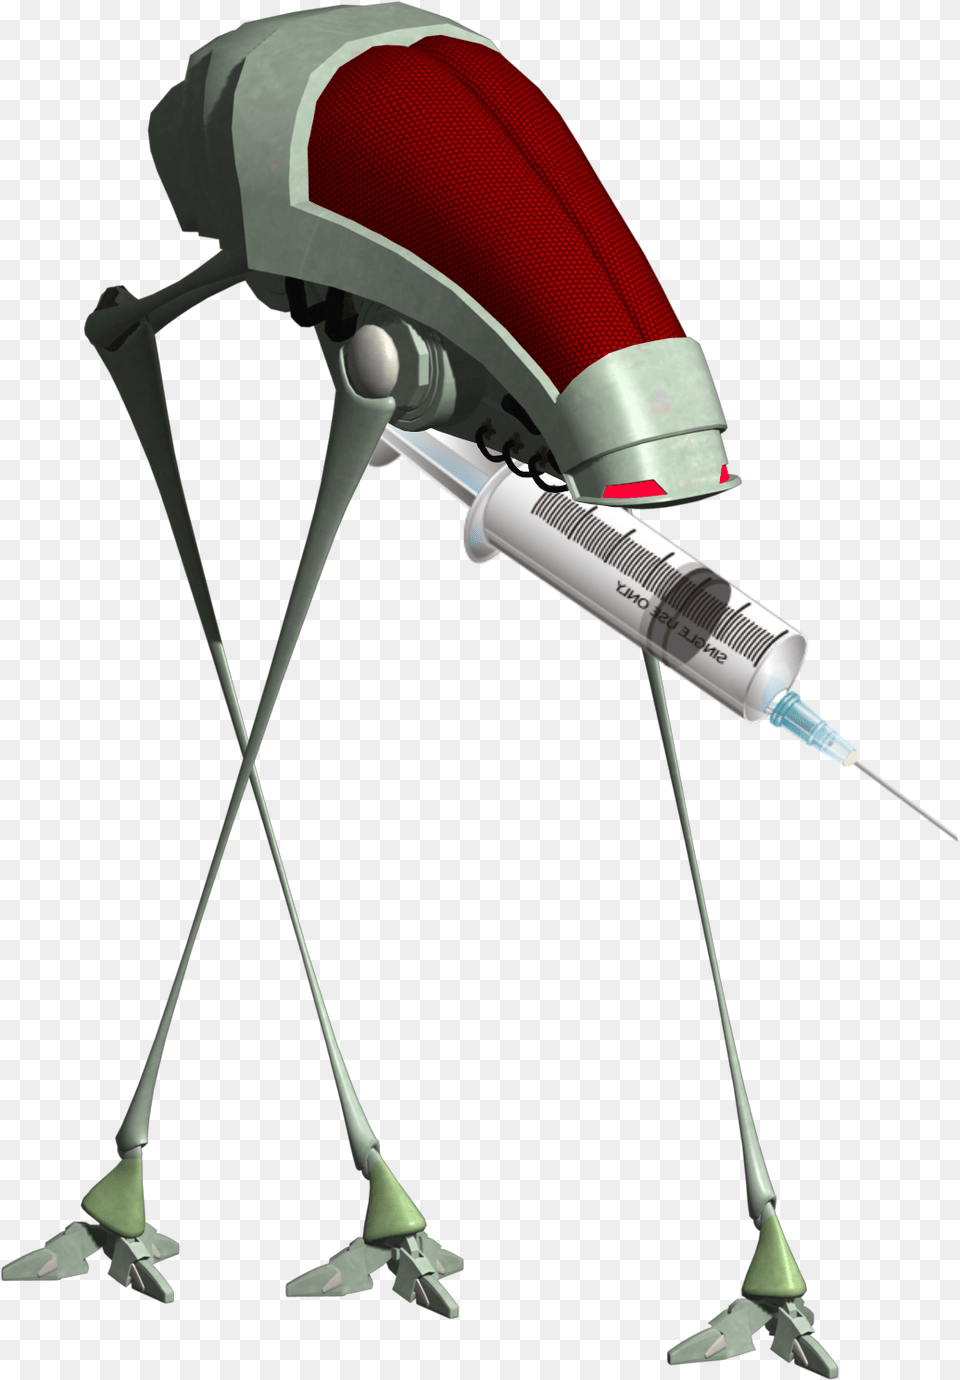 Trekking Pole Download Jeff Wayne War Of The Worlds Martian Machines, Device, Electrical Device, Appliance, Aircraft Png